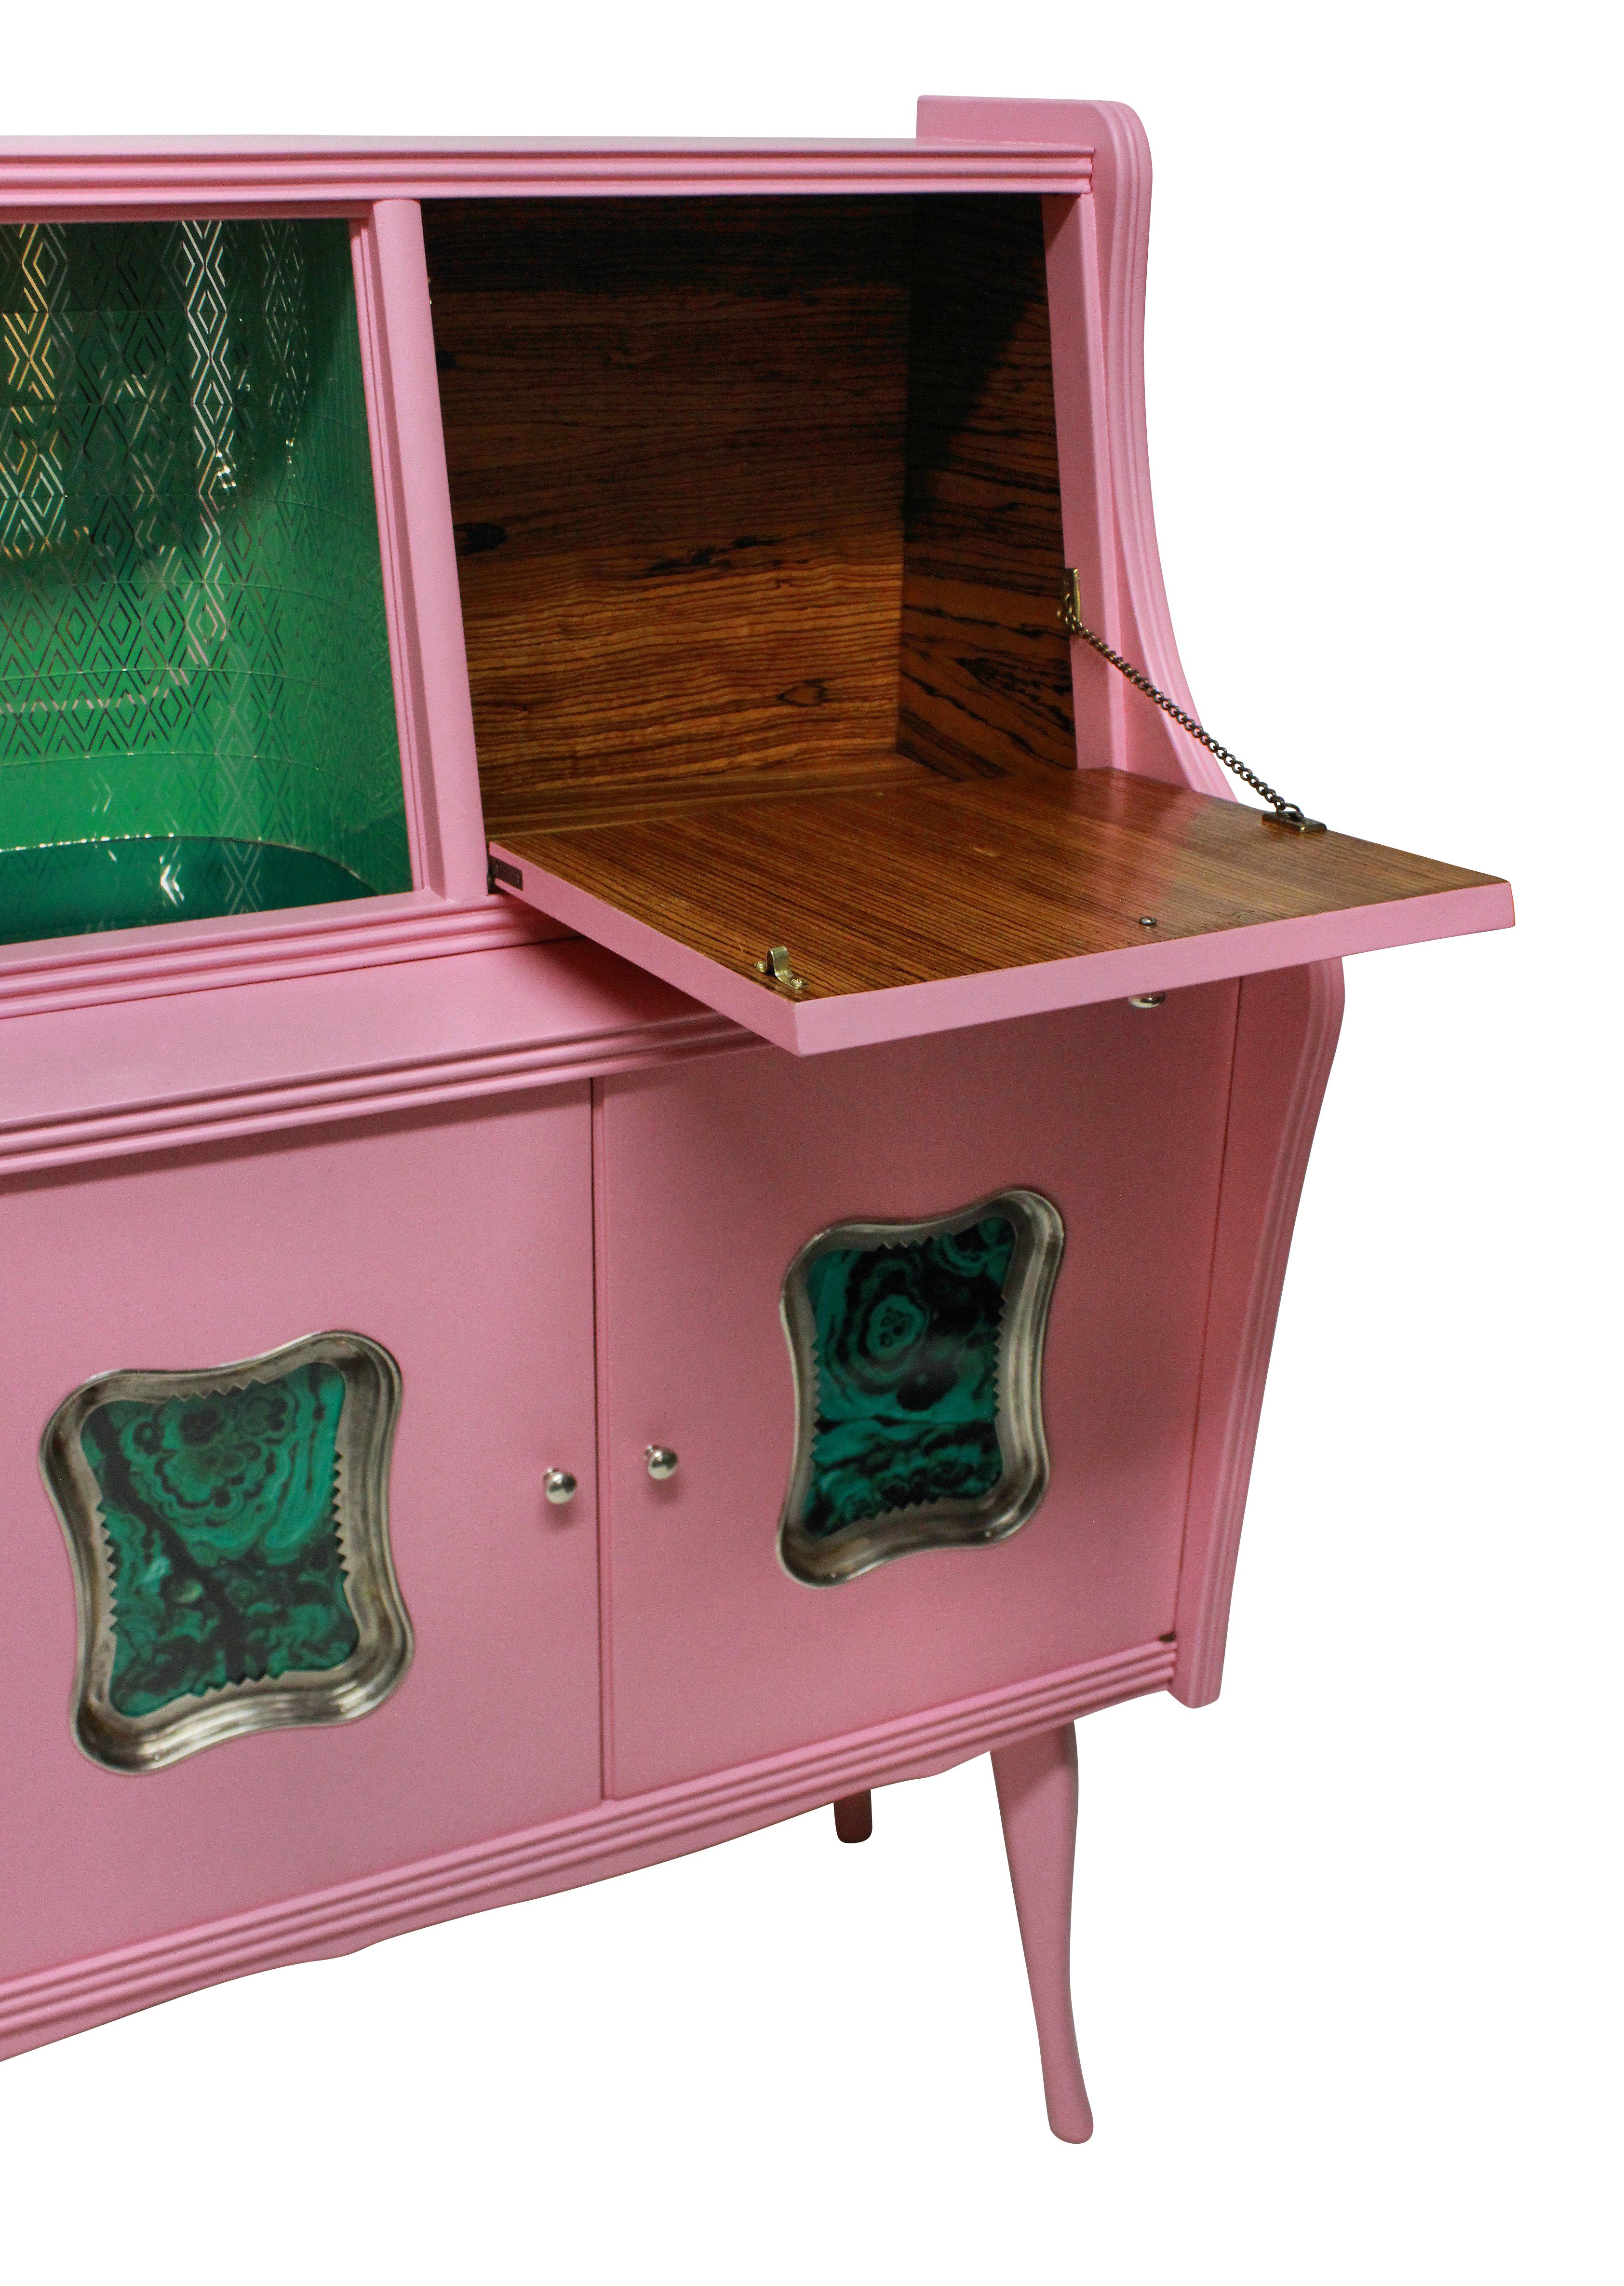 Mid-20th Century Italian Midcentury Bar Cabinet in Pink Lacquer with Malachite Panels